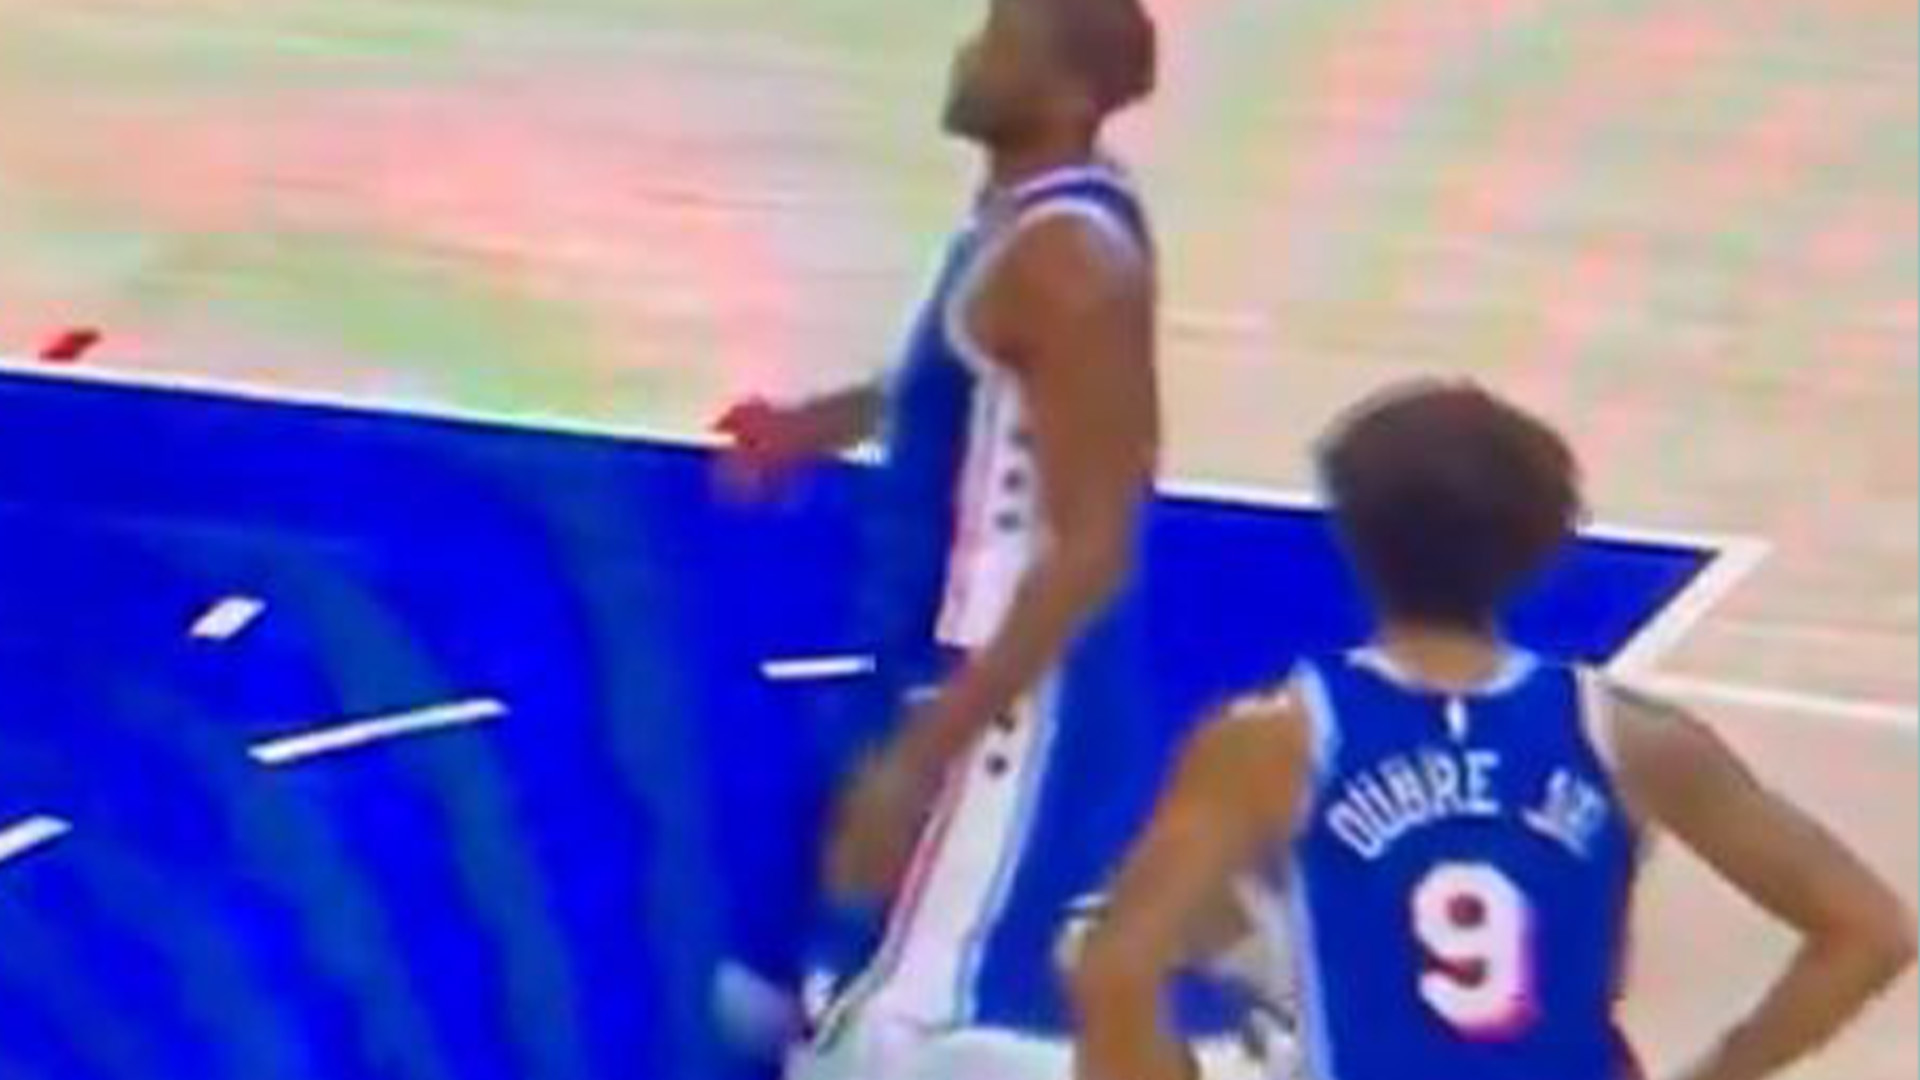 NBA fans concerned for Joel Embiid after 76ers star ‘flops’ on free throw during bizarre moment in win over Miami Heat [Video]